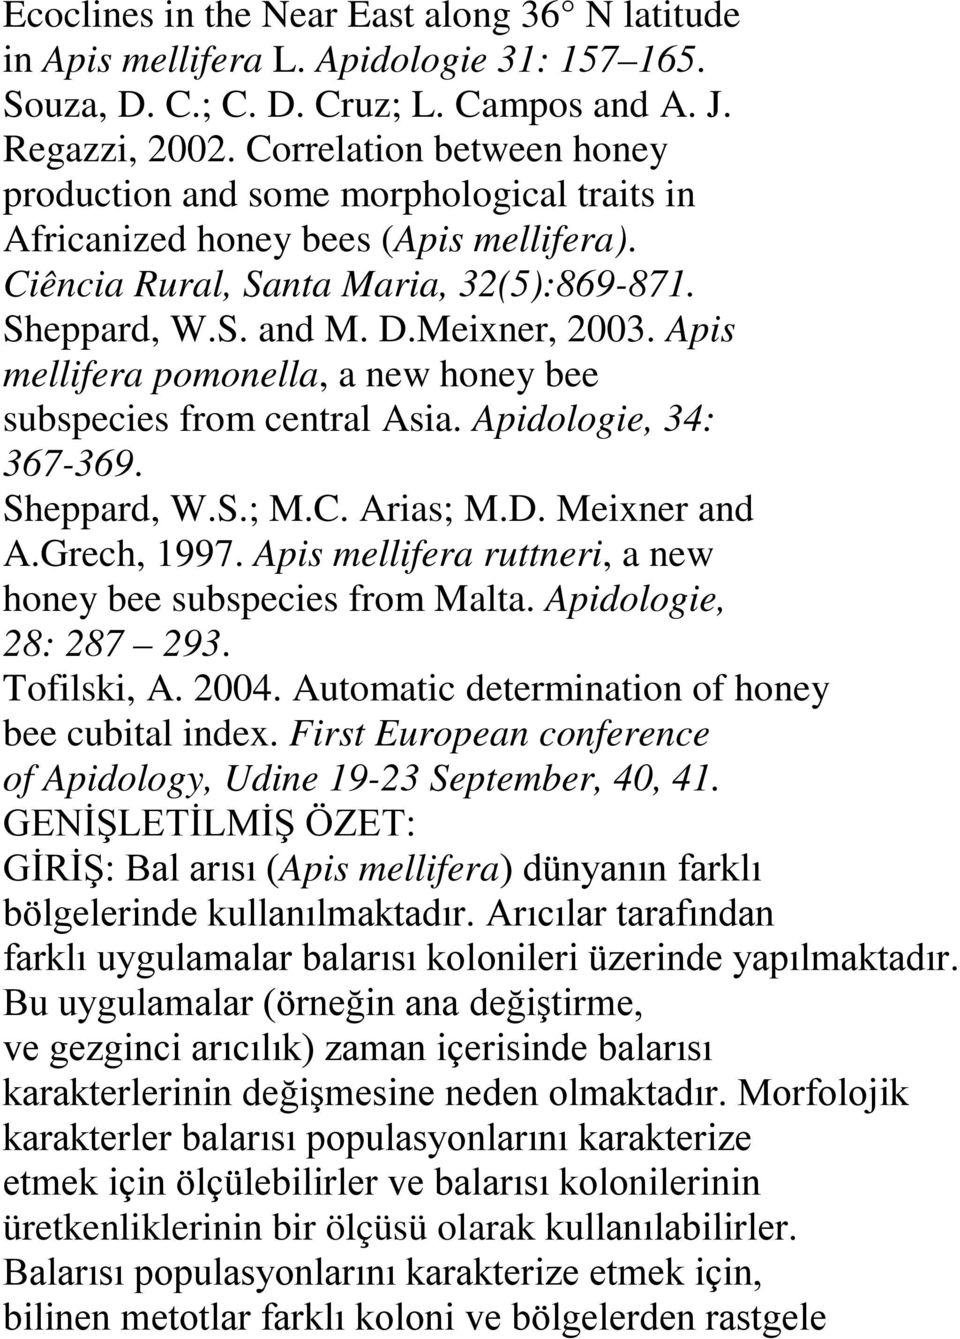 Apis mellifera pomonella, a new honey bee subspecies from central Asia. Apidologie, 34: 367-369. Sheppard, W.S.; M.C. Arias; M.D. Meixner and A.Grech, 1997.